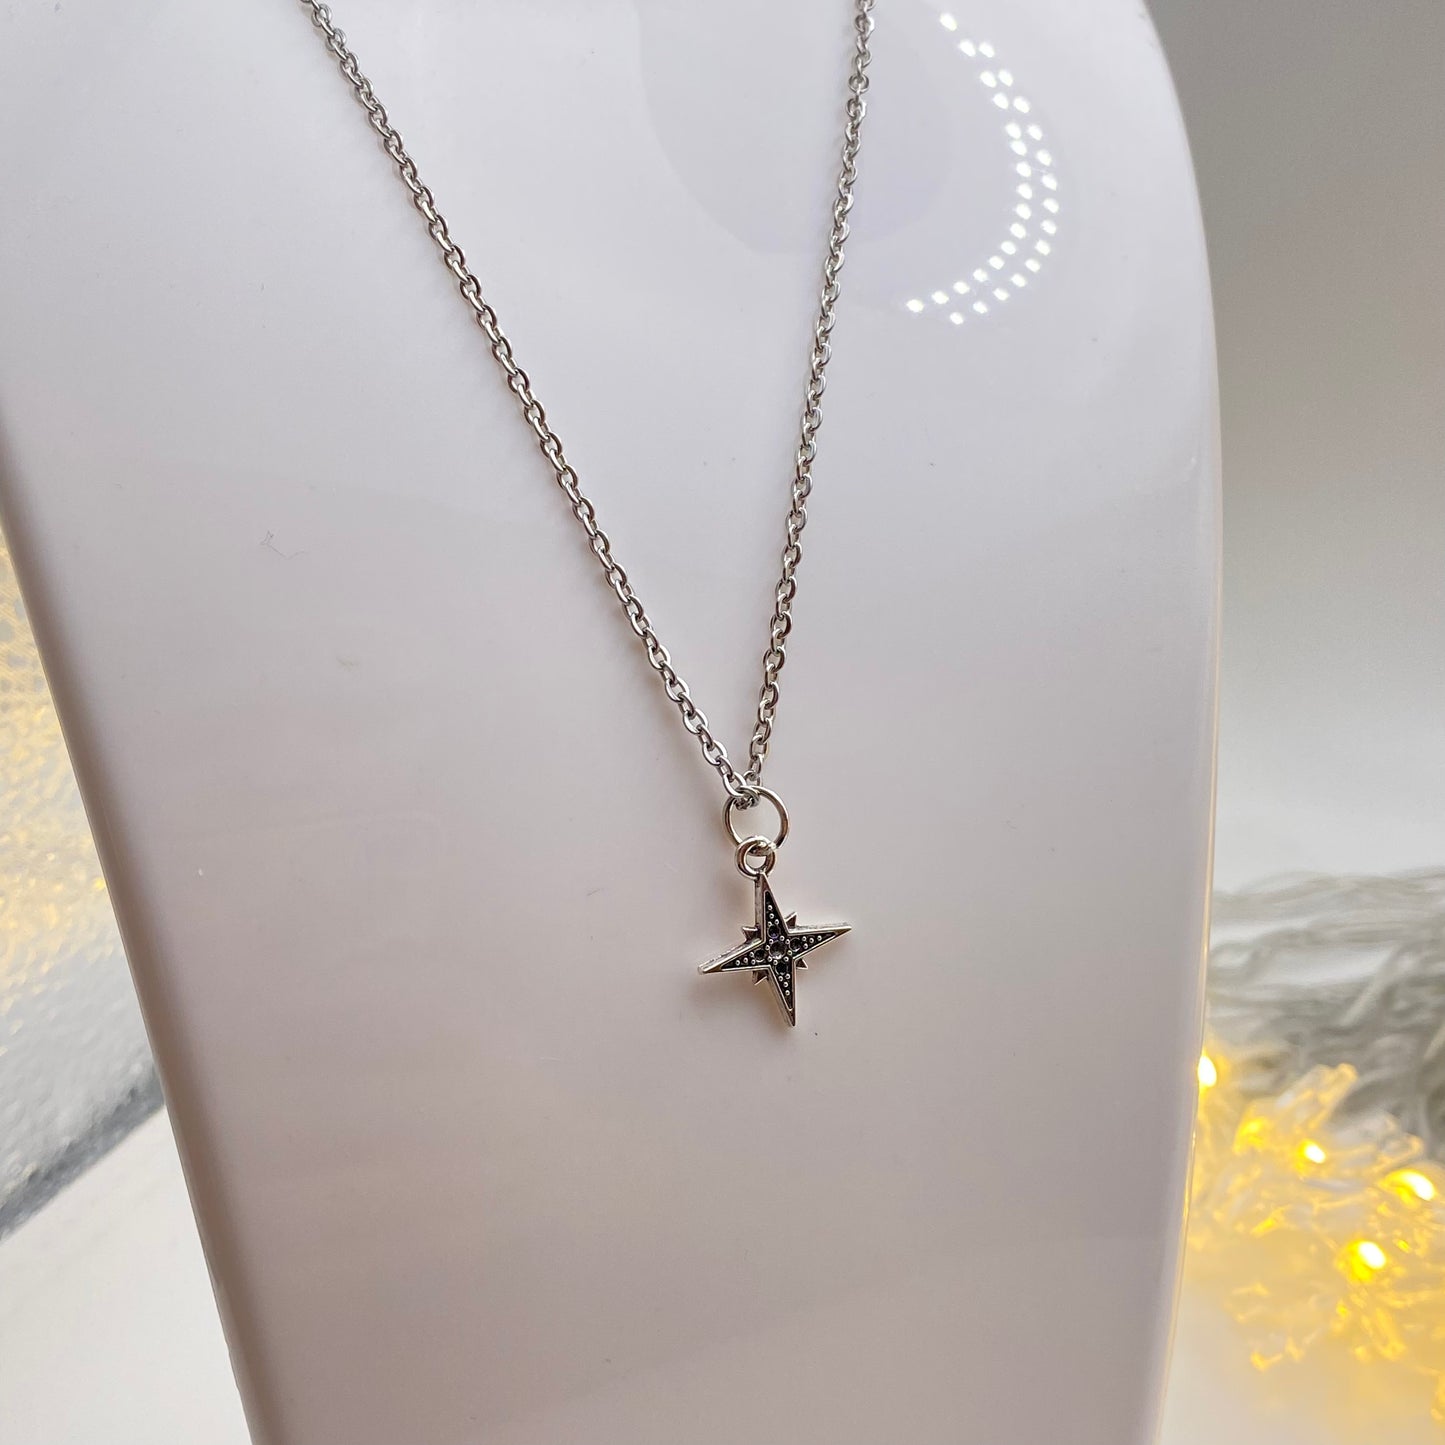 Twinkly Star Necklace